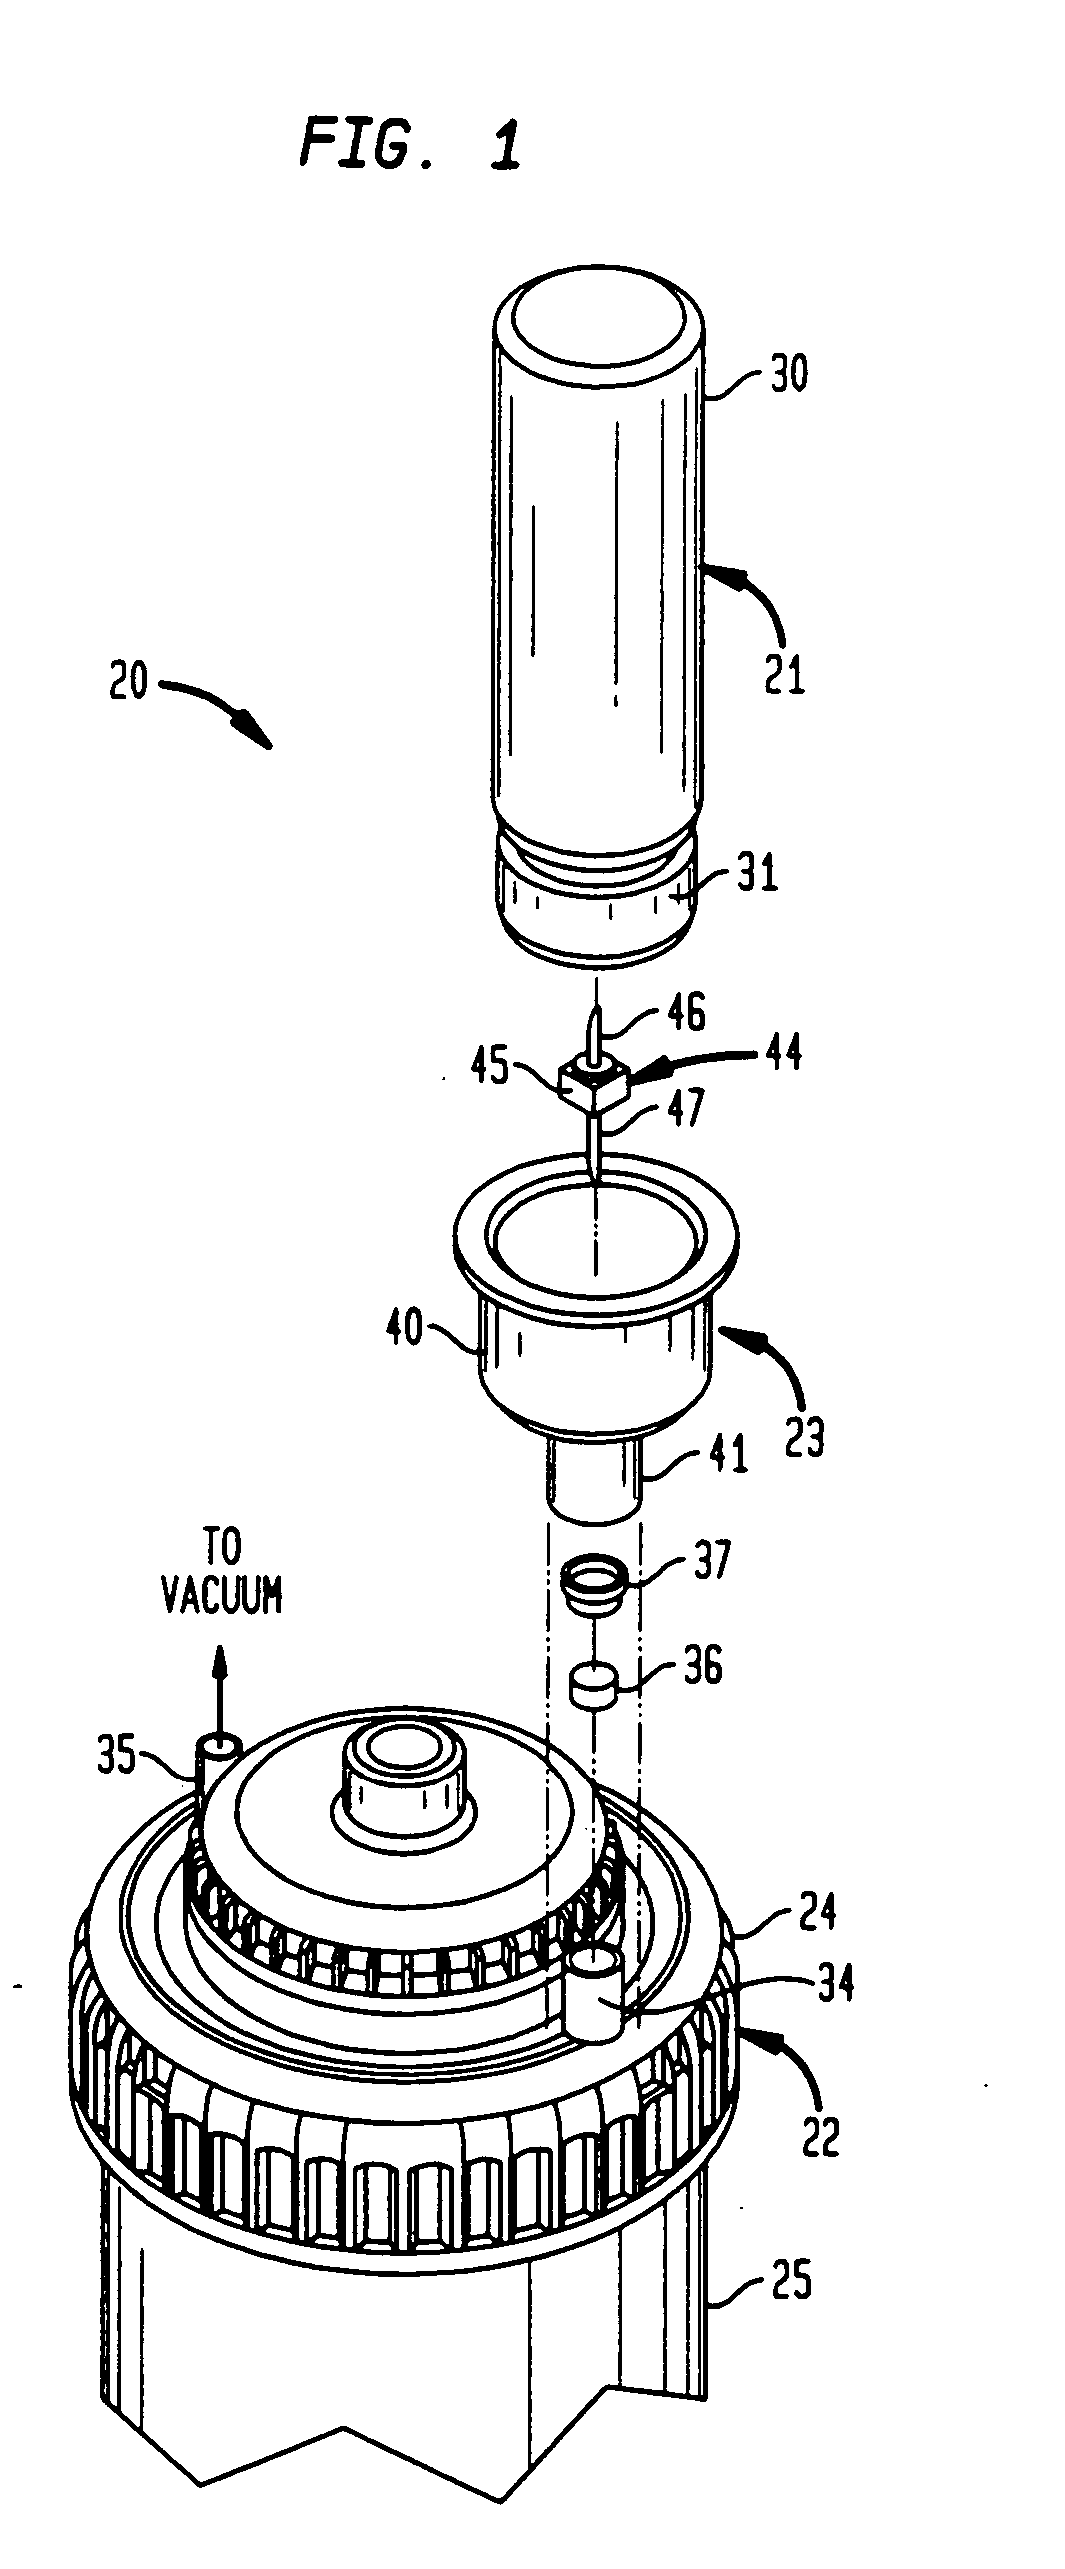 Apparatus for mixing and dispensing components